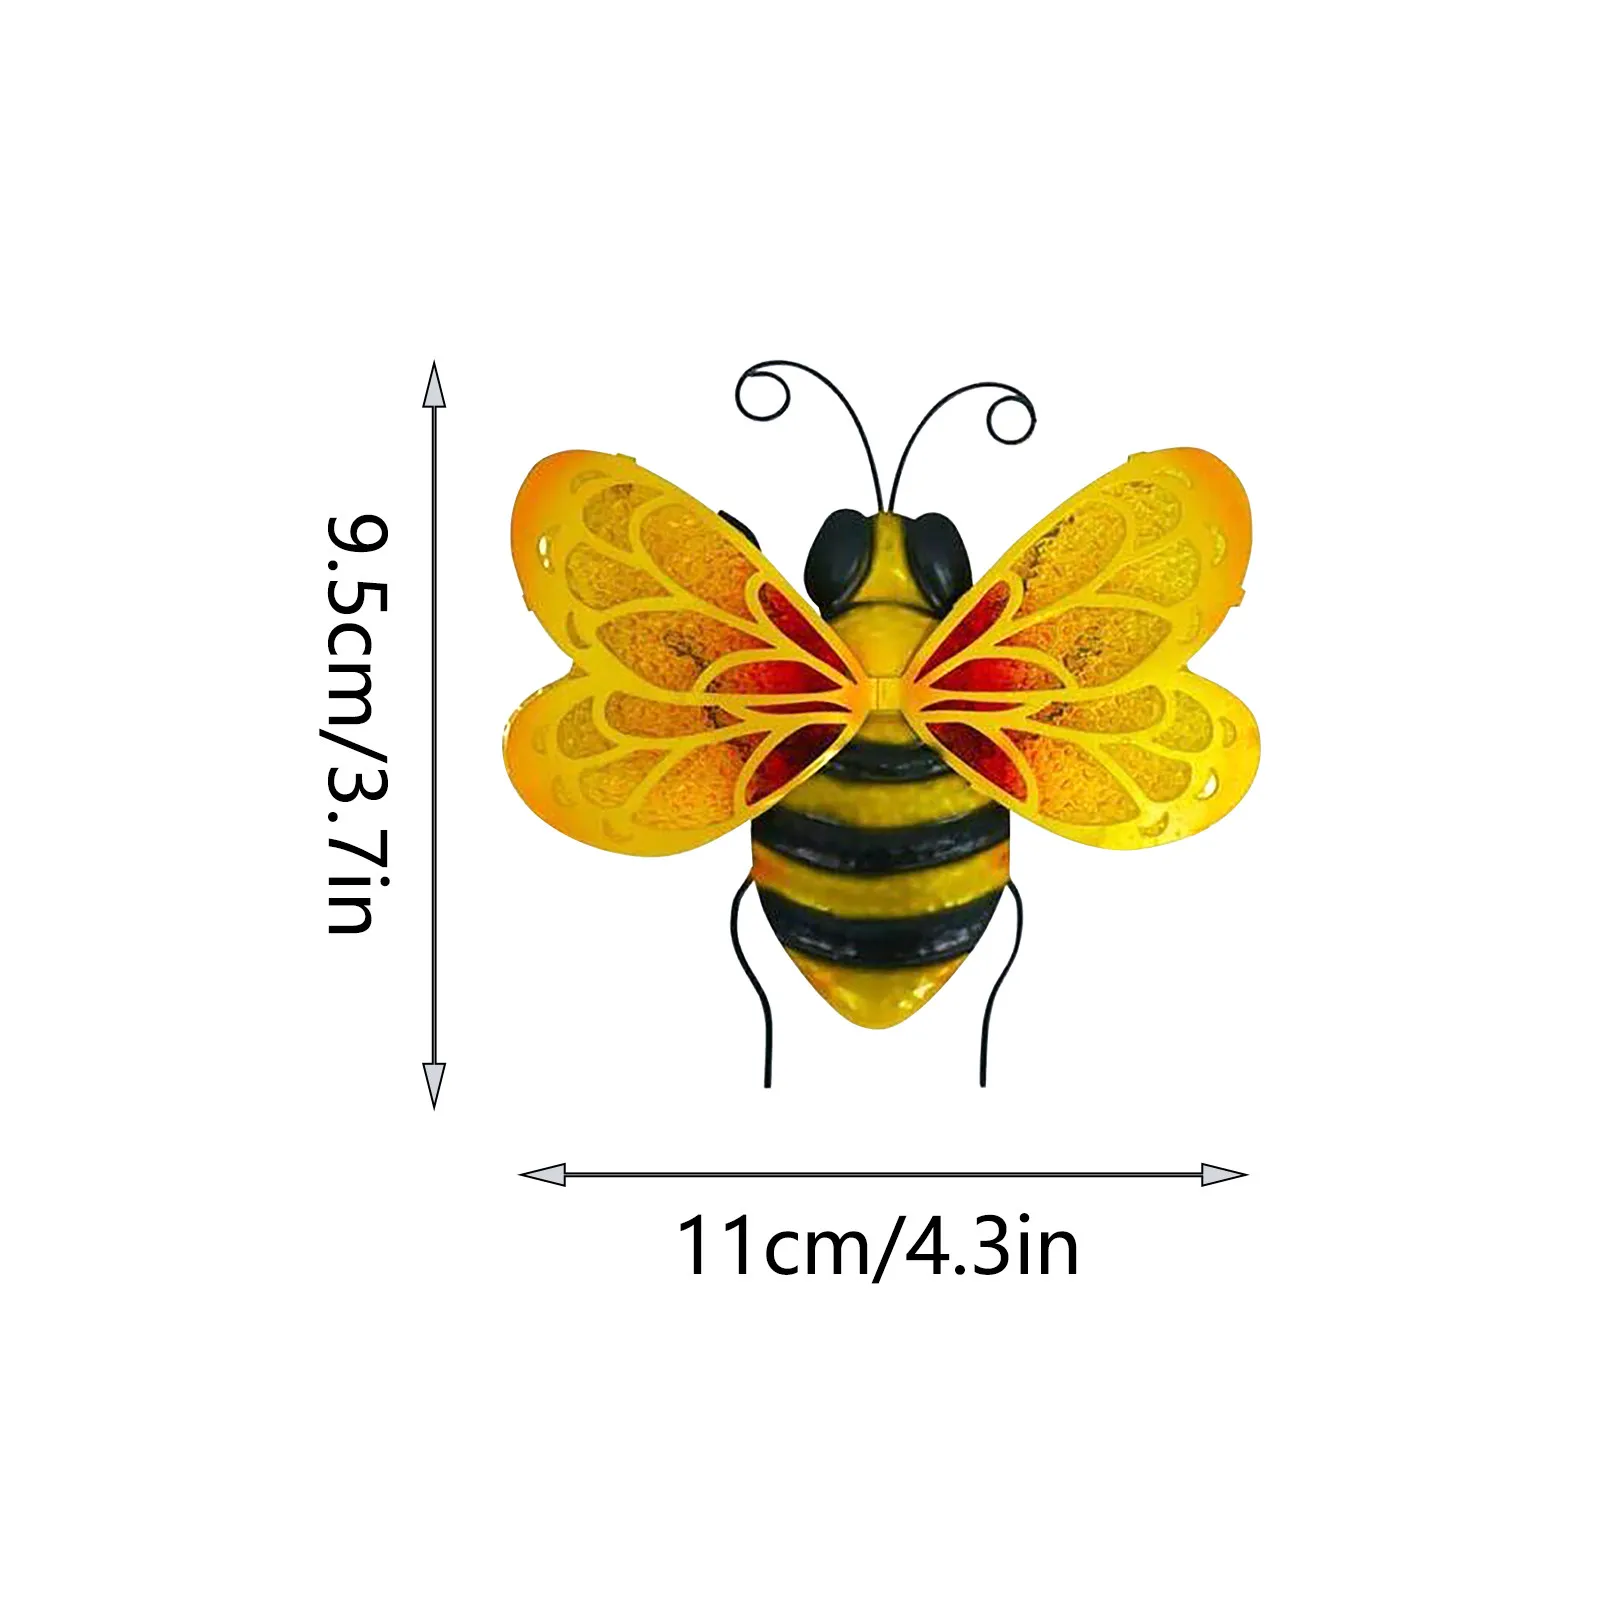 OLOPE Nostalgia Decorative Metal Bumble Bee Wall Ornament,Garden Accents Yard Fence 3D Sculpture Ornaments,Lawn Bar Bedroom Living Room Wall Hanging Bumblebee Art Decoration 